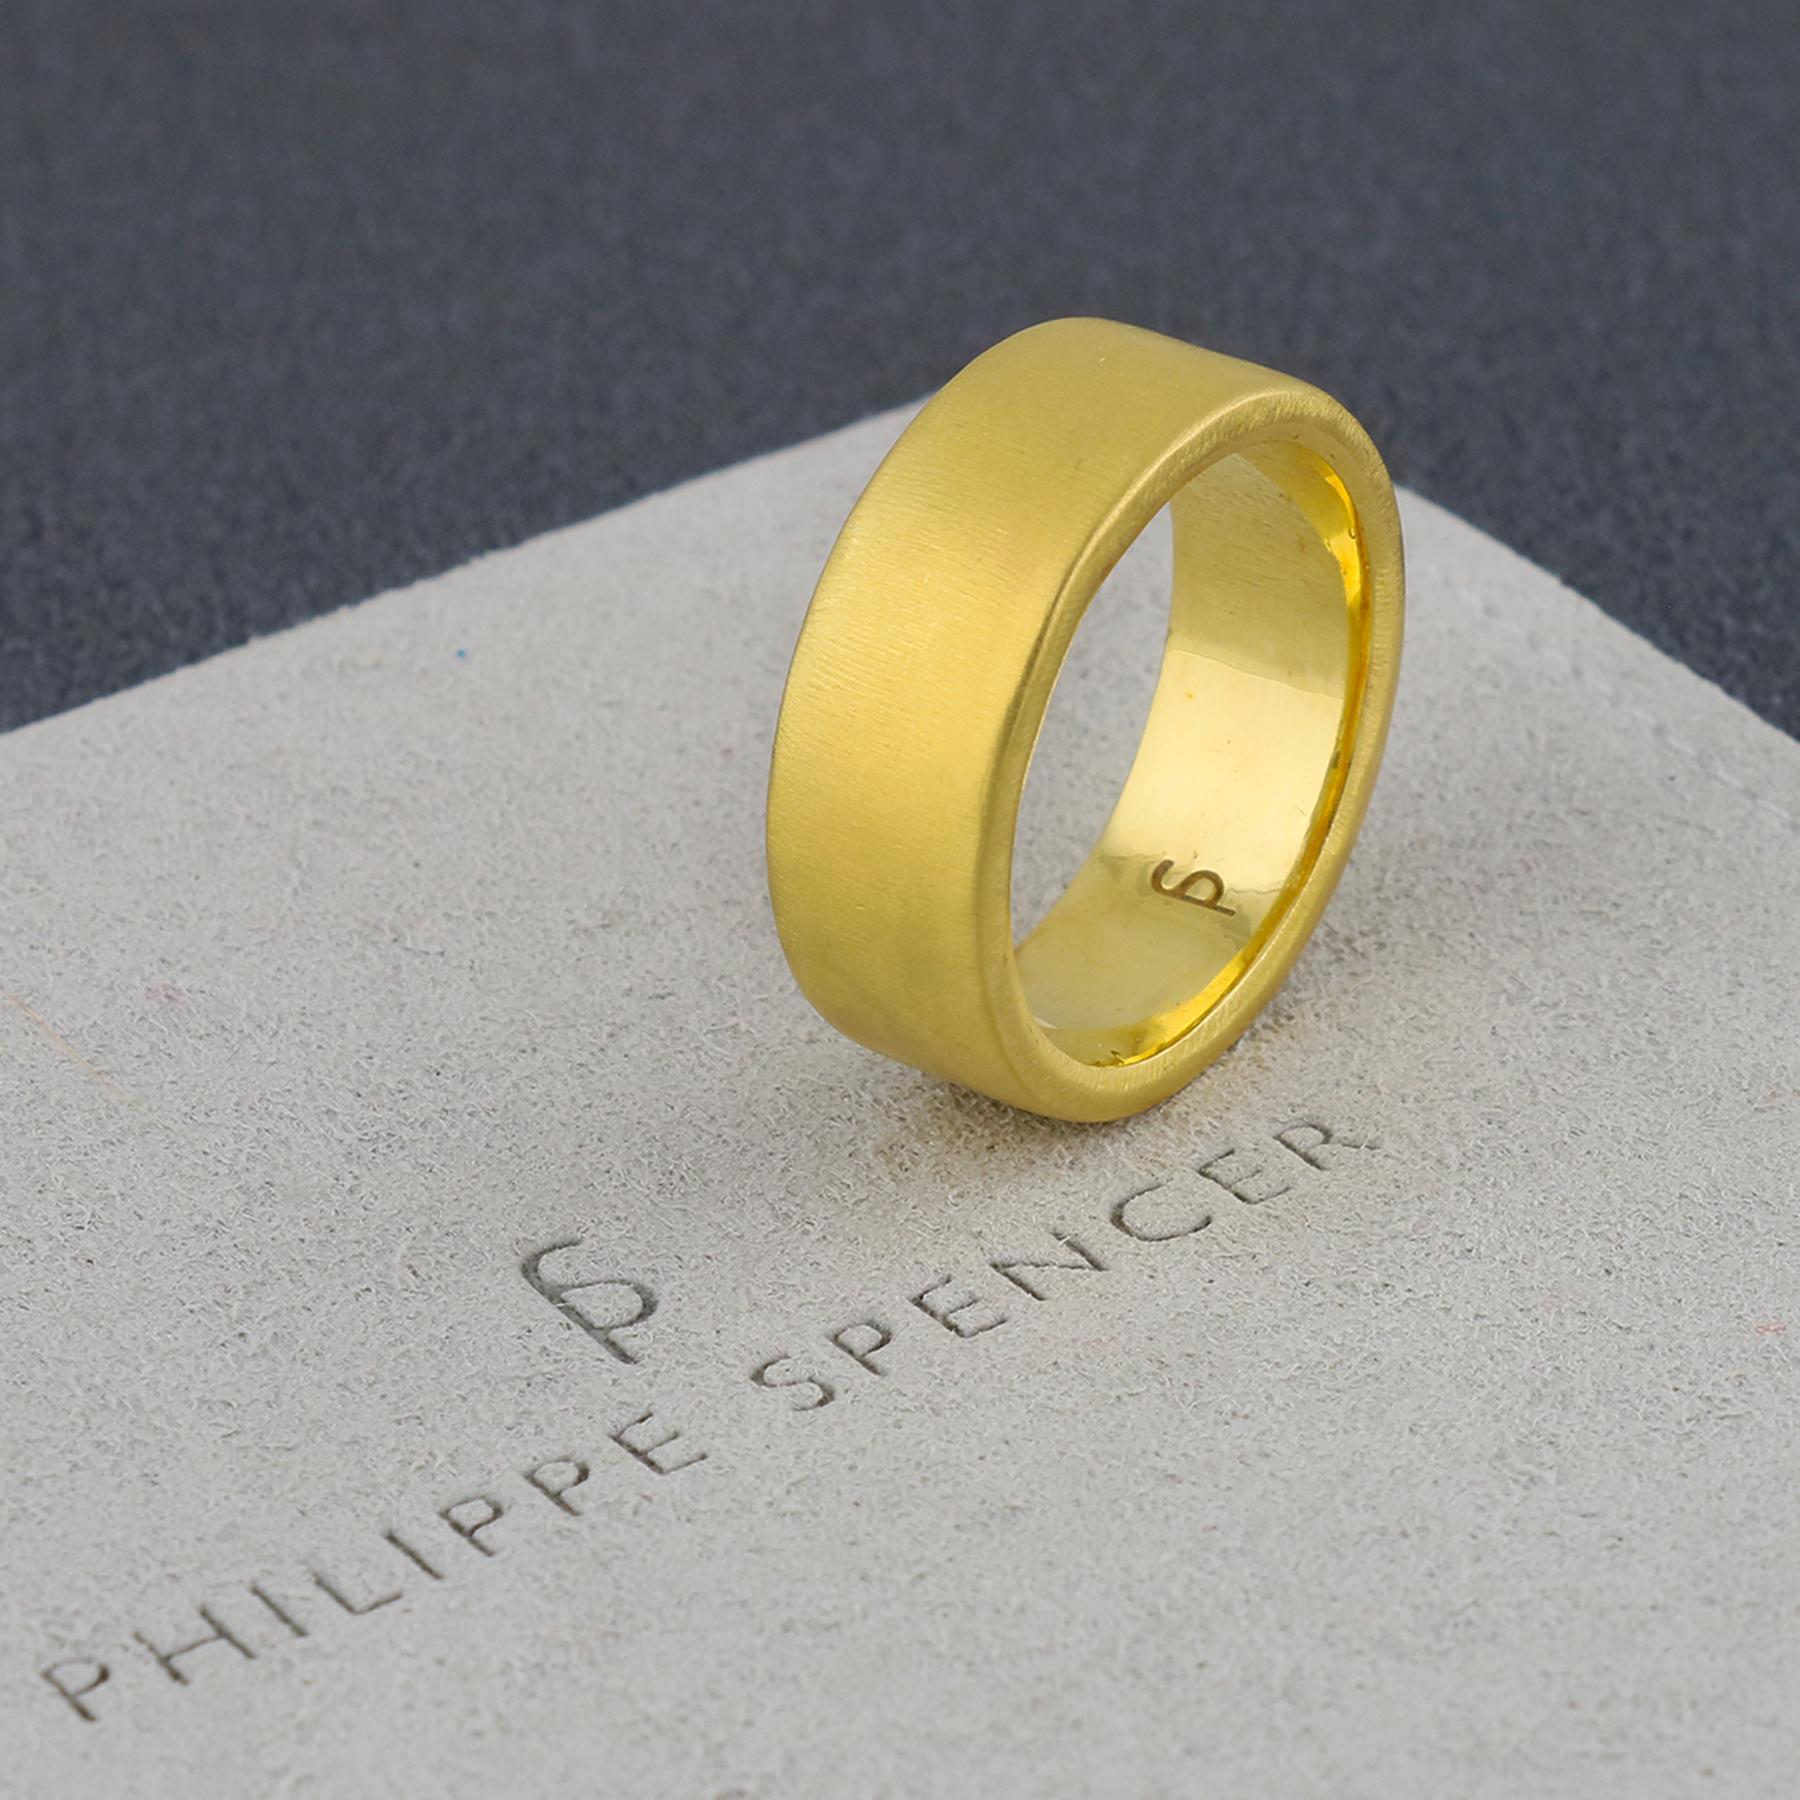 PHILIPPE-SPENCER - 8 X 2mm Solid 20K Gold Hand-Forged Statement Band. Heavy Matte Exterior, Mirror Polished Interior.  Each is a unique one-of-a-kind work of art. This PHILIPPE SPENCER Solid 20K Gold Hand Made band is extremely popular with both Men